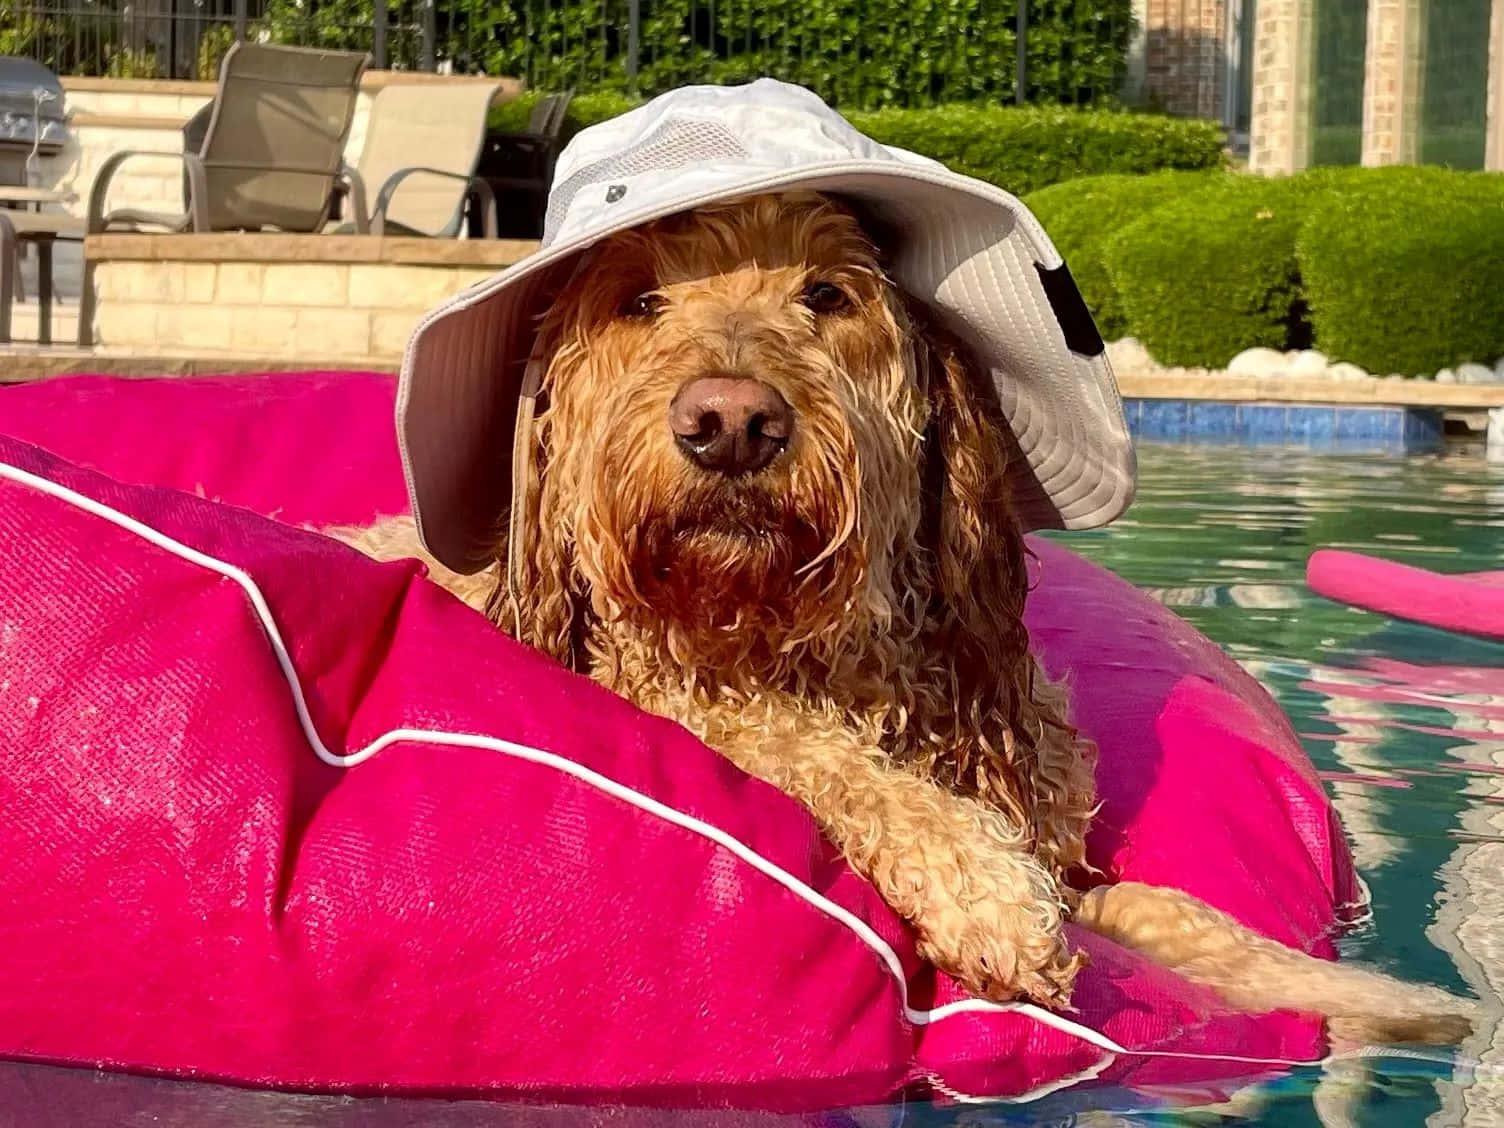 Relaxed Dogin Poolwith Hat Wallpaper